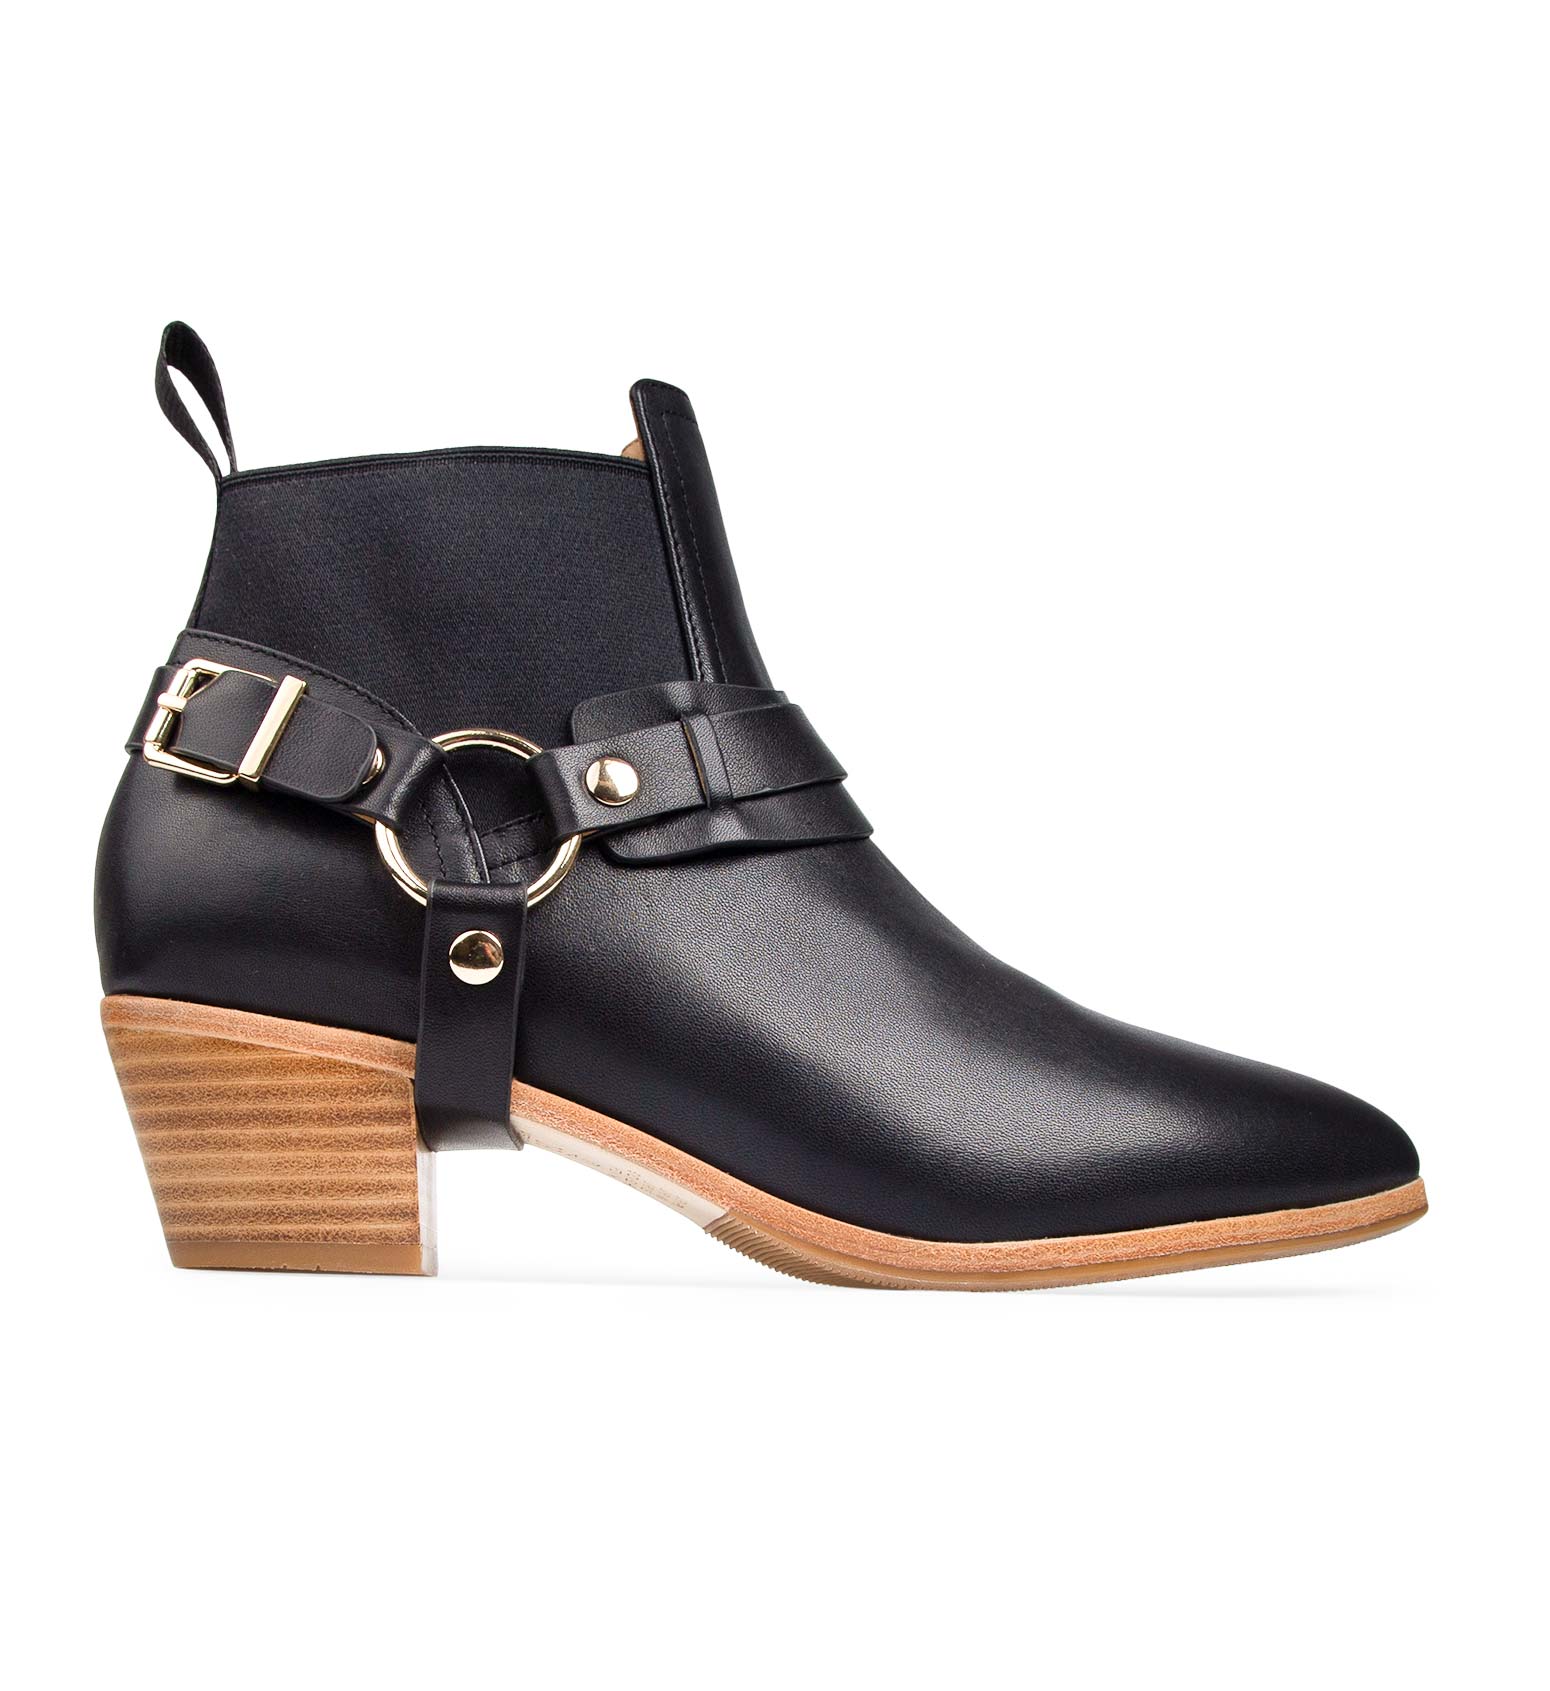 Cuckoo Black Leather Ankle Boots | Bared Footwear